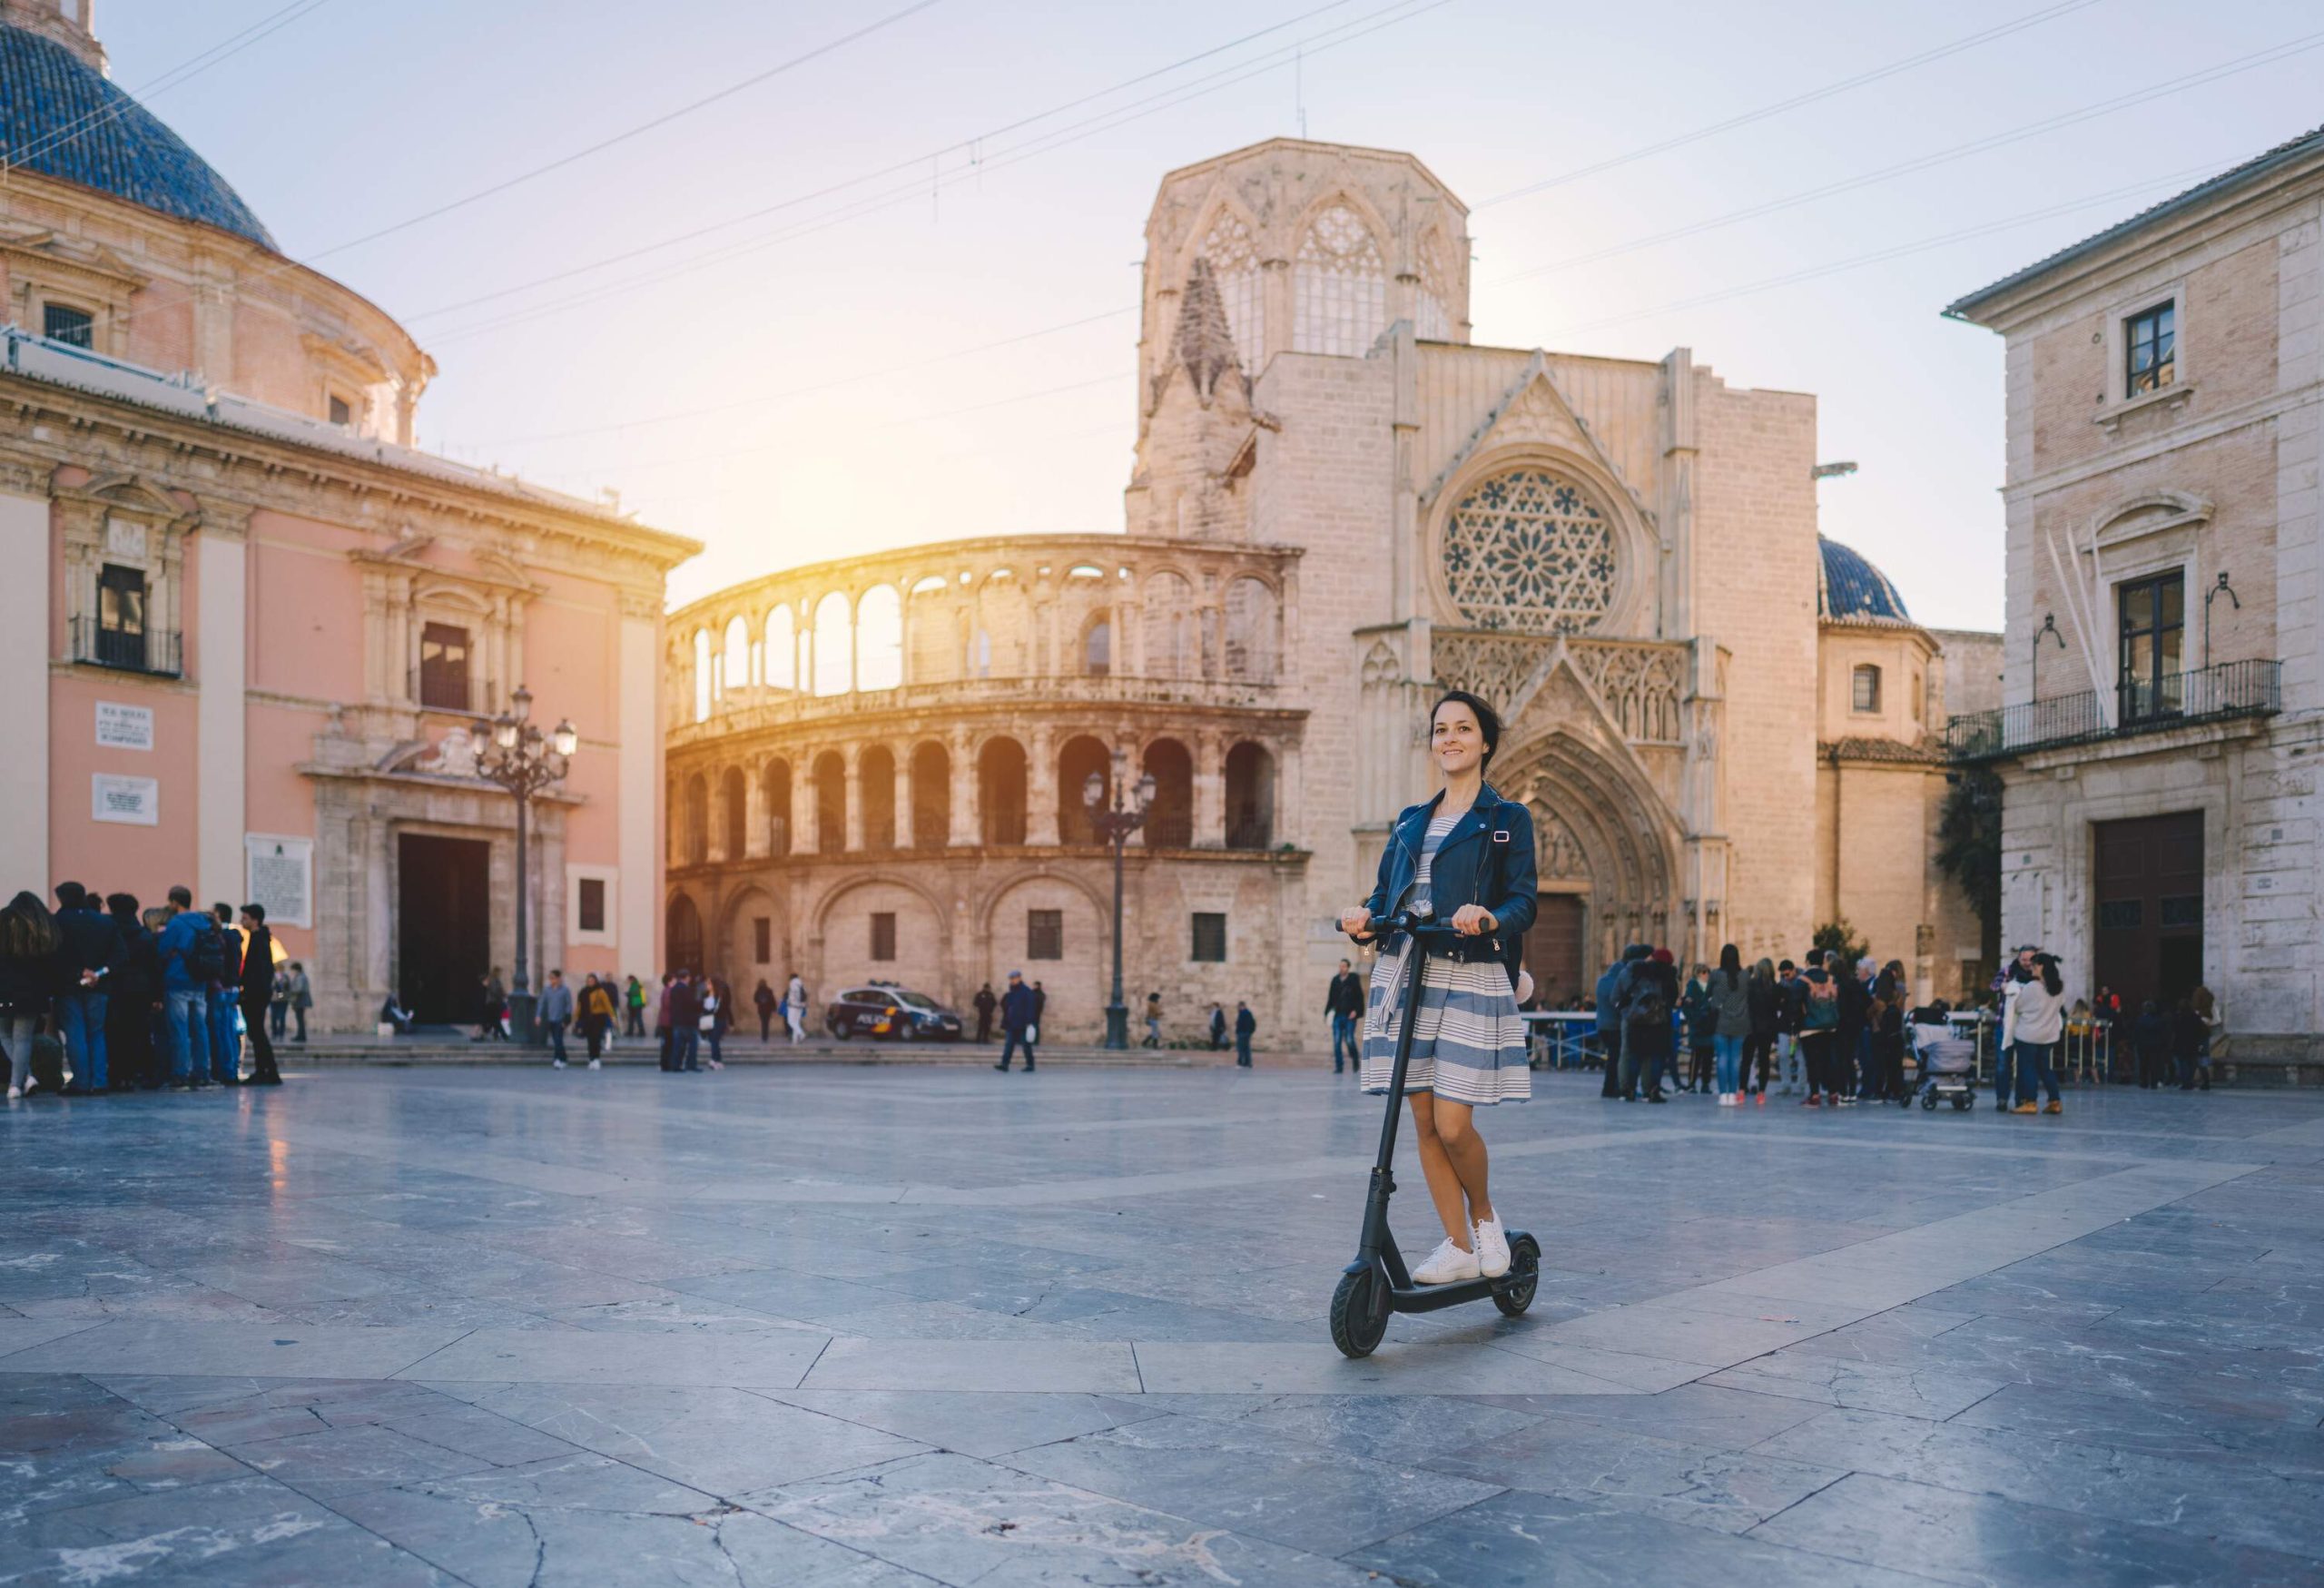 A woman on a scooter in a plaza square surrounded by classic historical buildings.